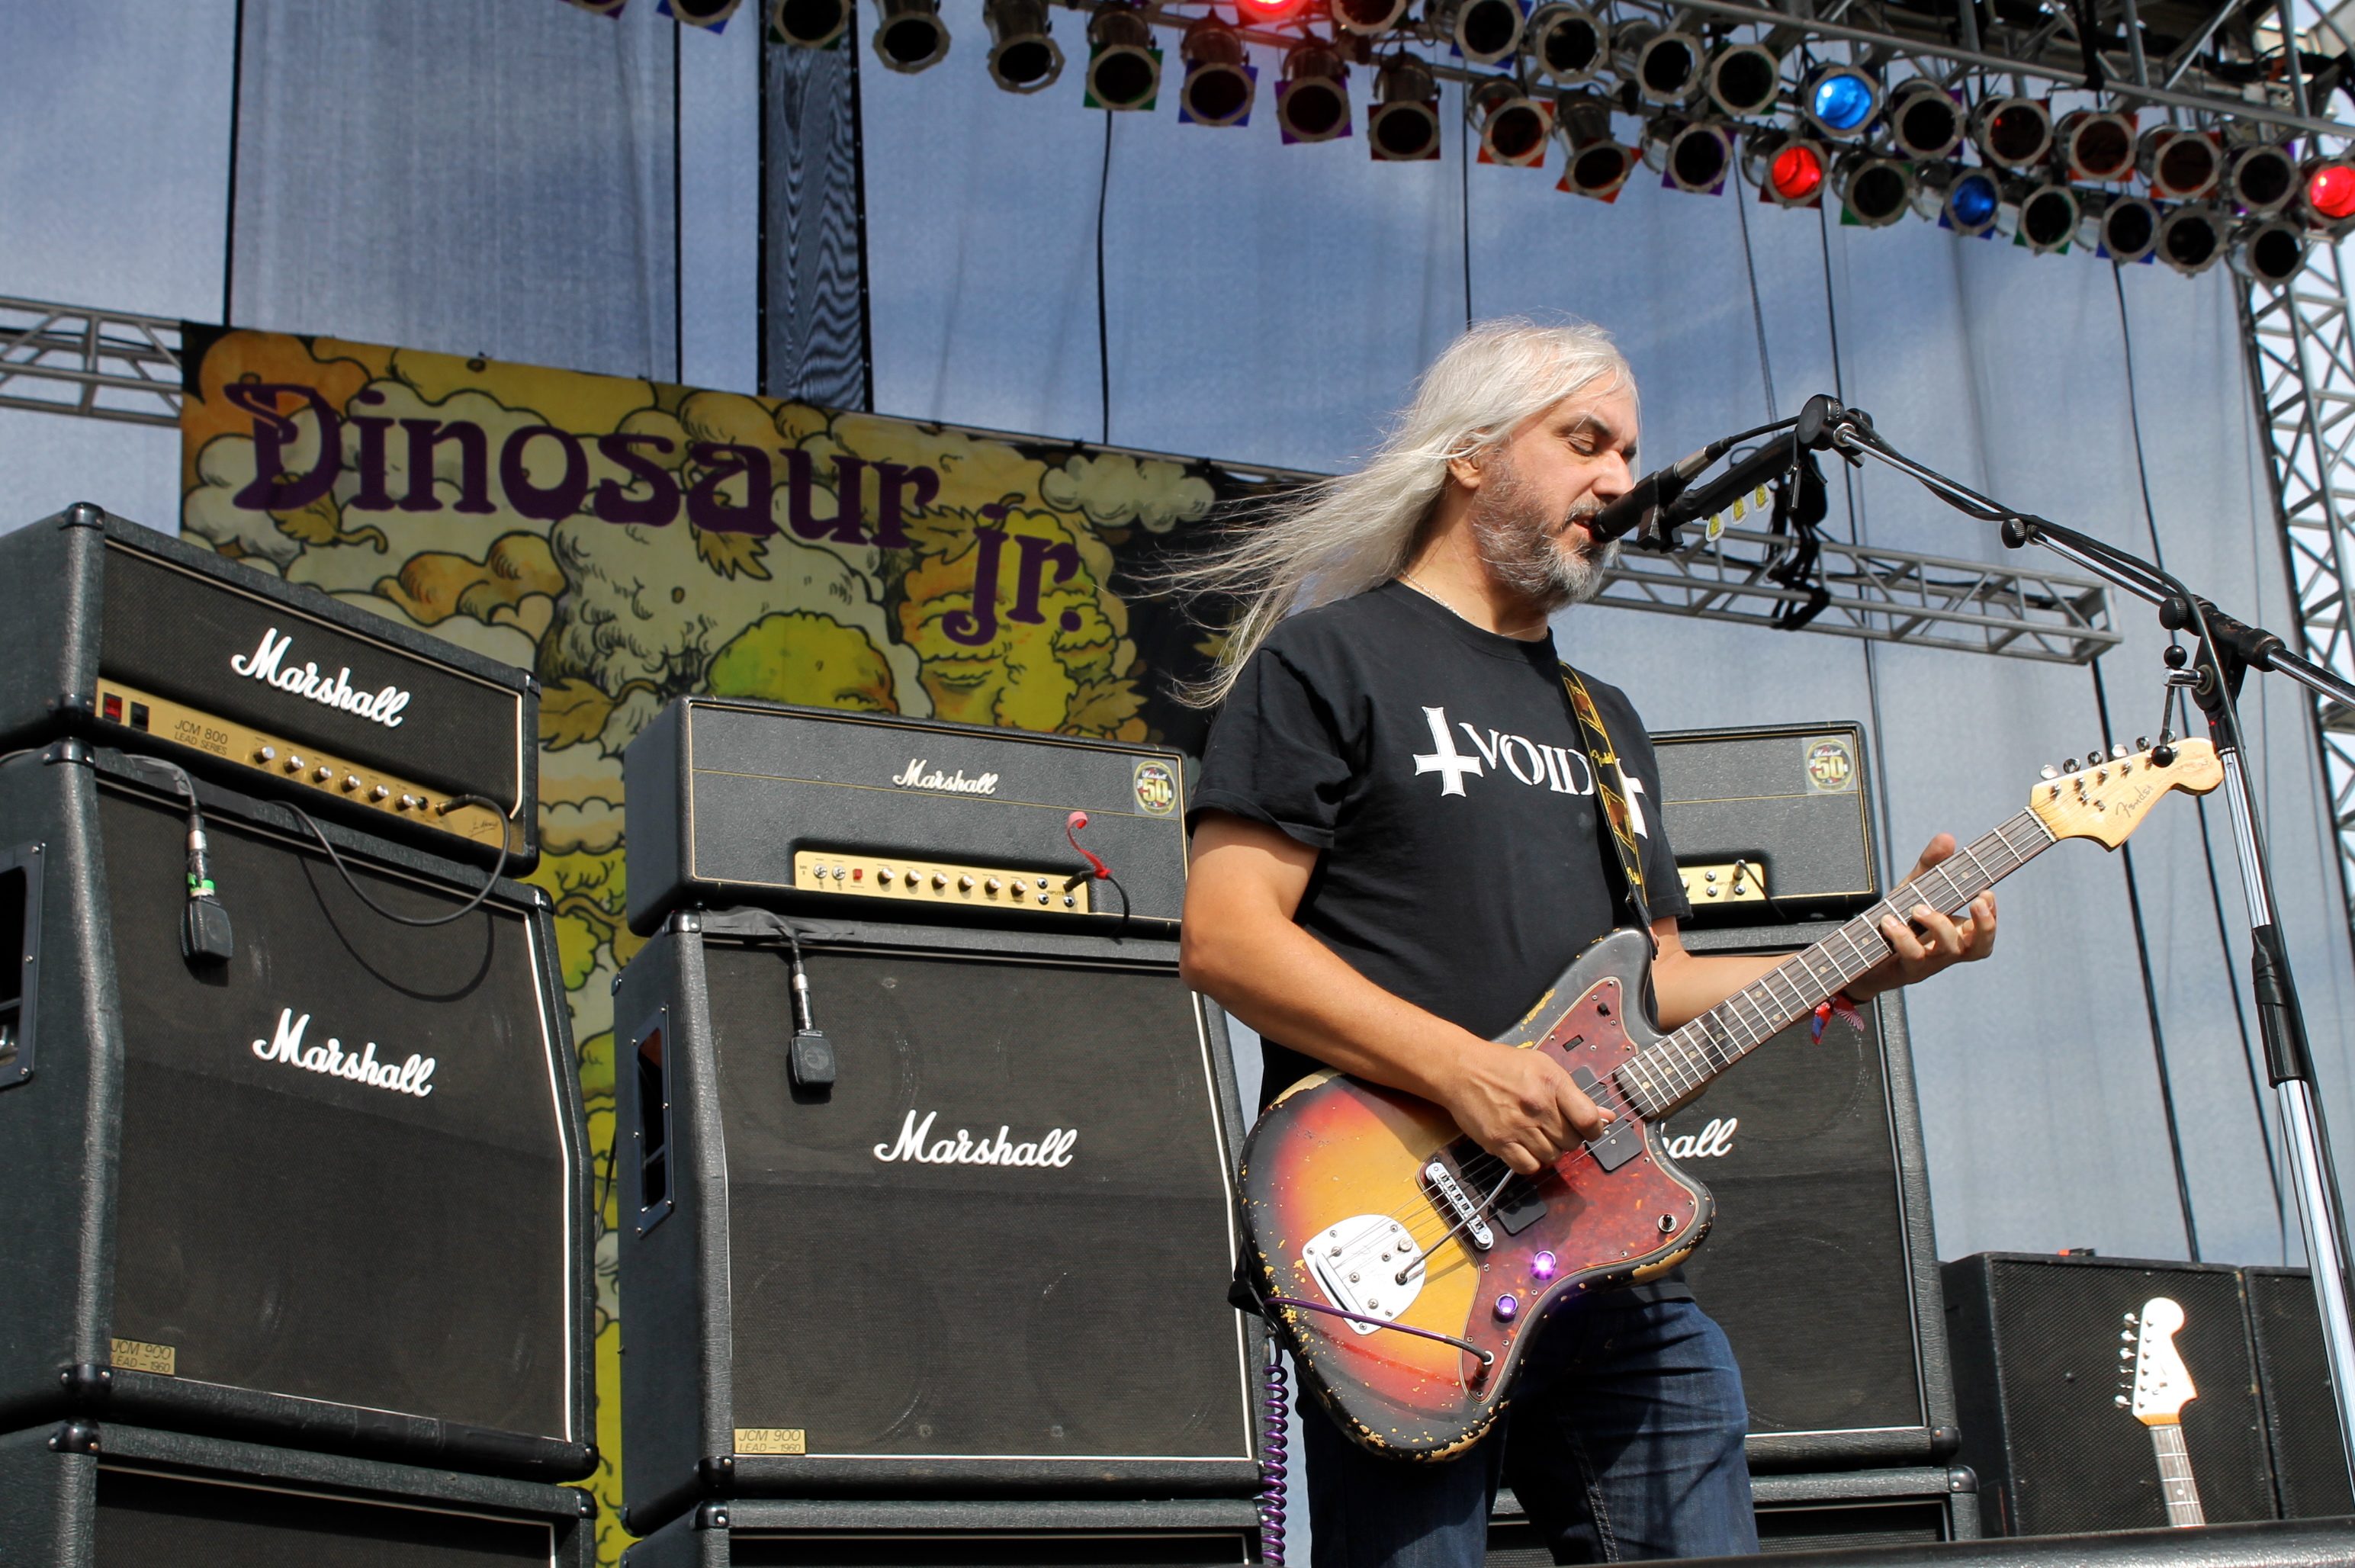 Dinosaur Jr. Announces New Album Sweep It Into Space for April 2021 Release and Shares New Song "I Ran Away"